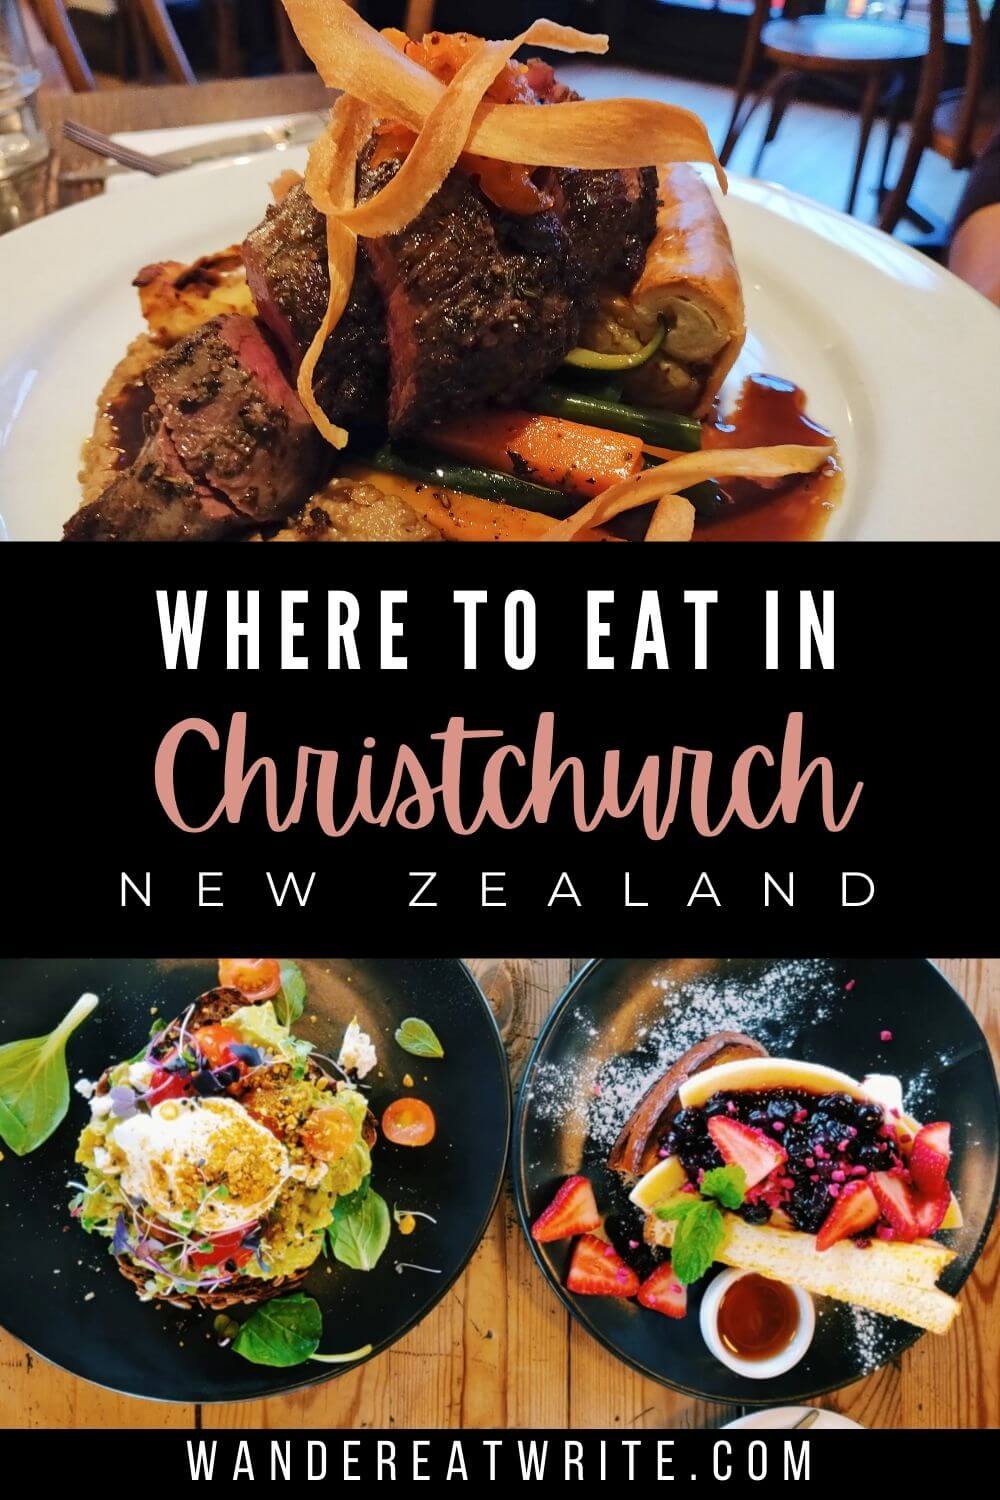 Pin text: Where to eat in Christchurch, New Zealand. Top photo: beef fillet; bottom photo: avocado toast and french toast